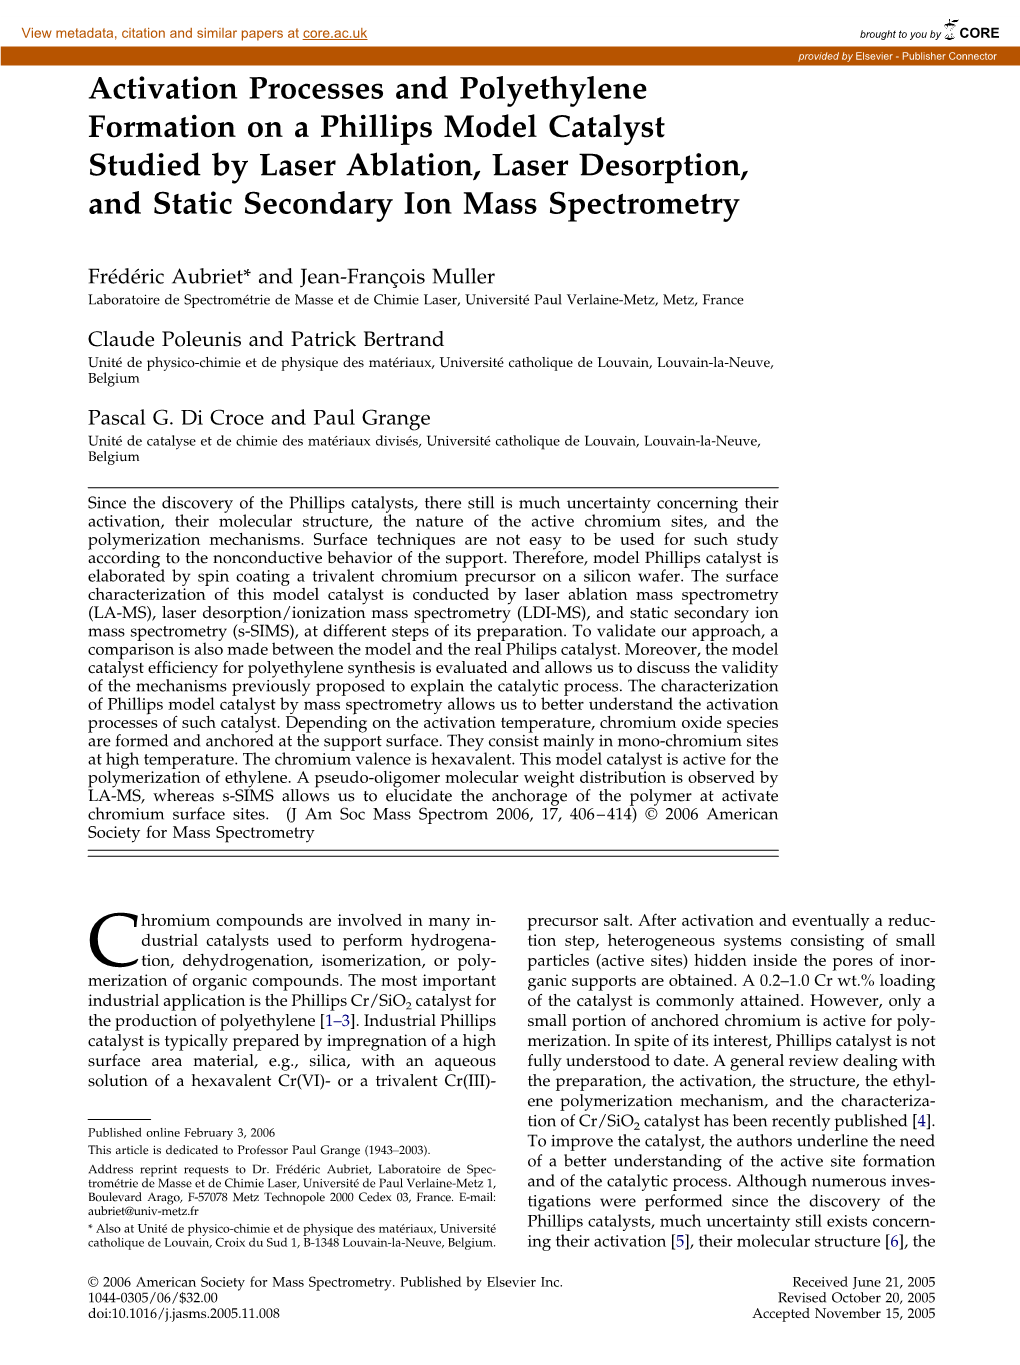 Activation Processes and Polyethylene Formation on a Phillips Model Catalyst Studied by Laser Ablation, Laser Desorption, and Static Secondary Ion Mass Spectrometry